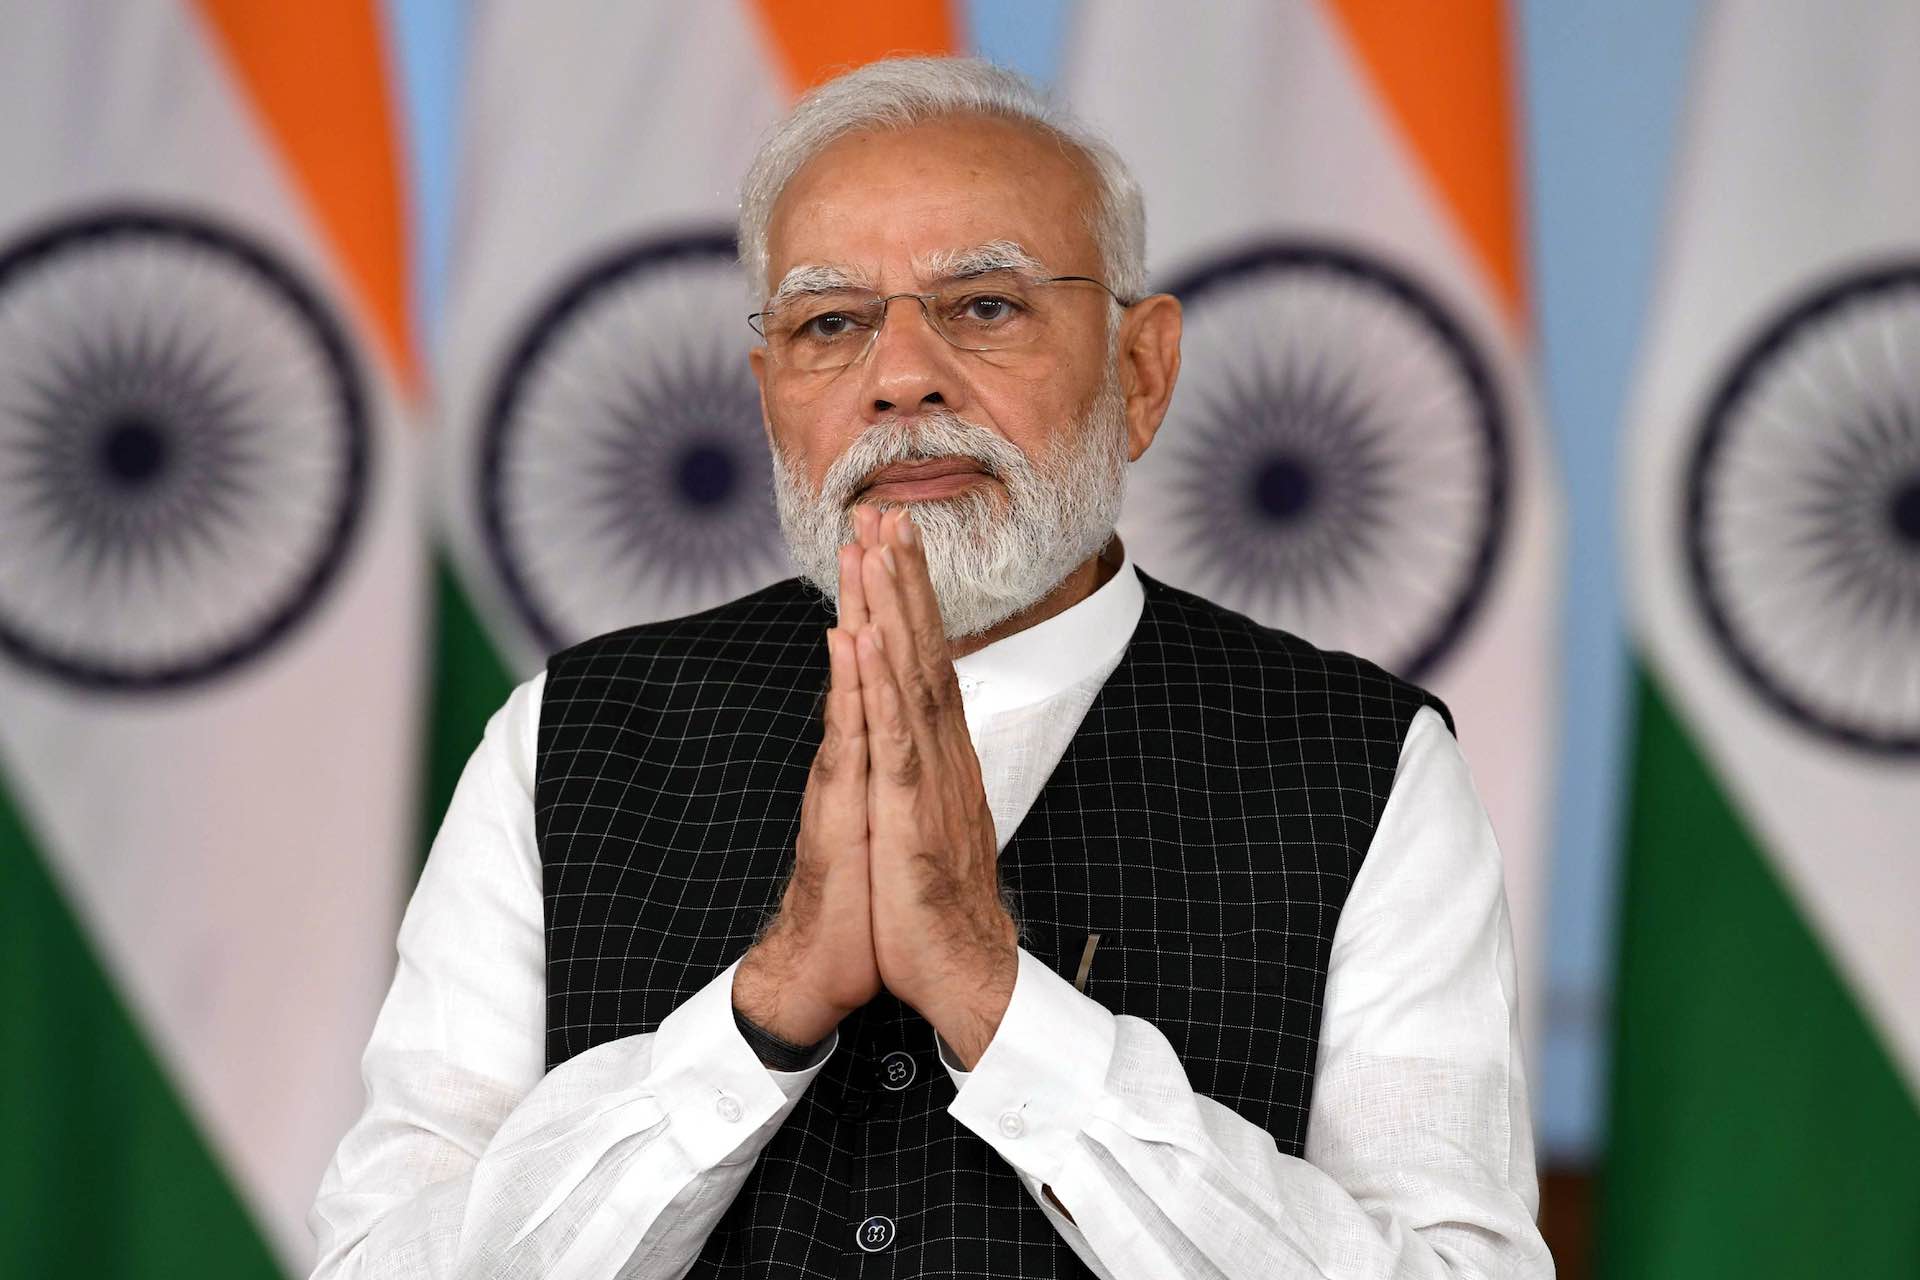 PM Modi expected to visit the UAE by month-end according to sources